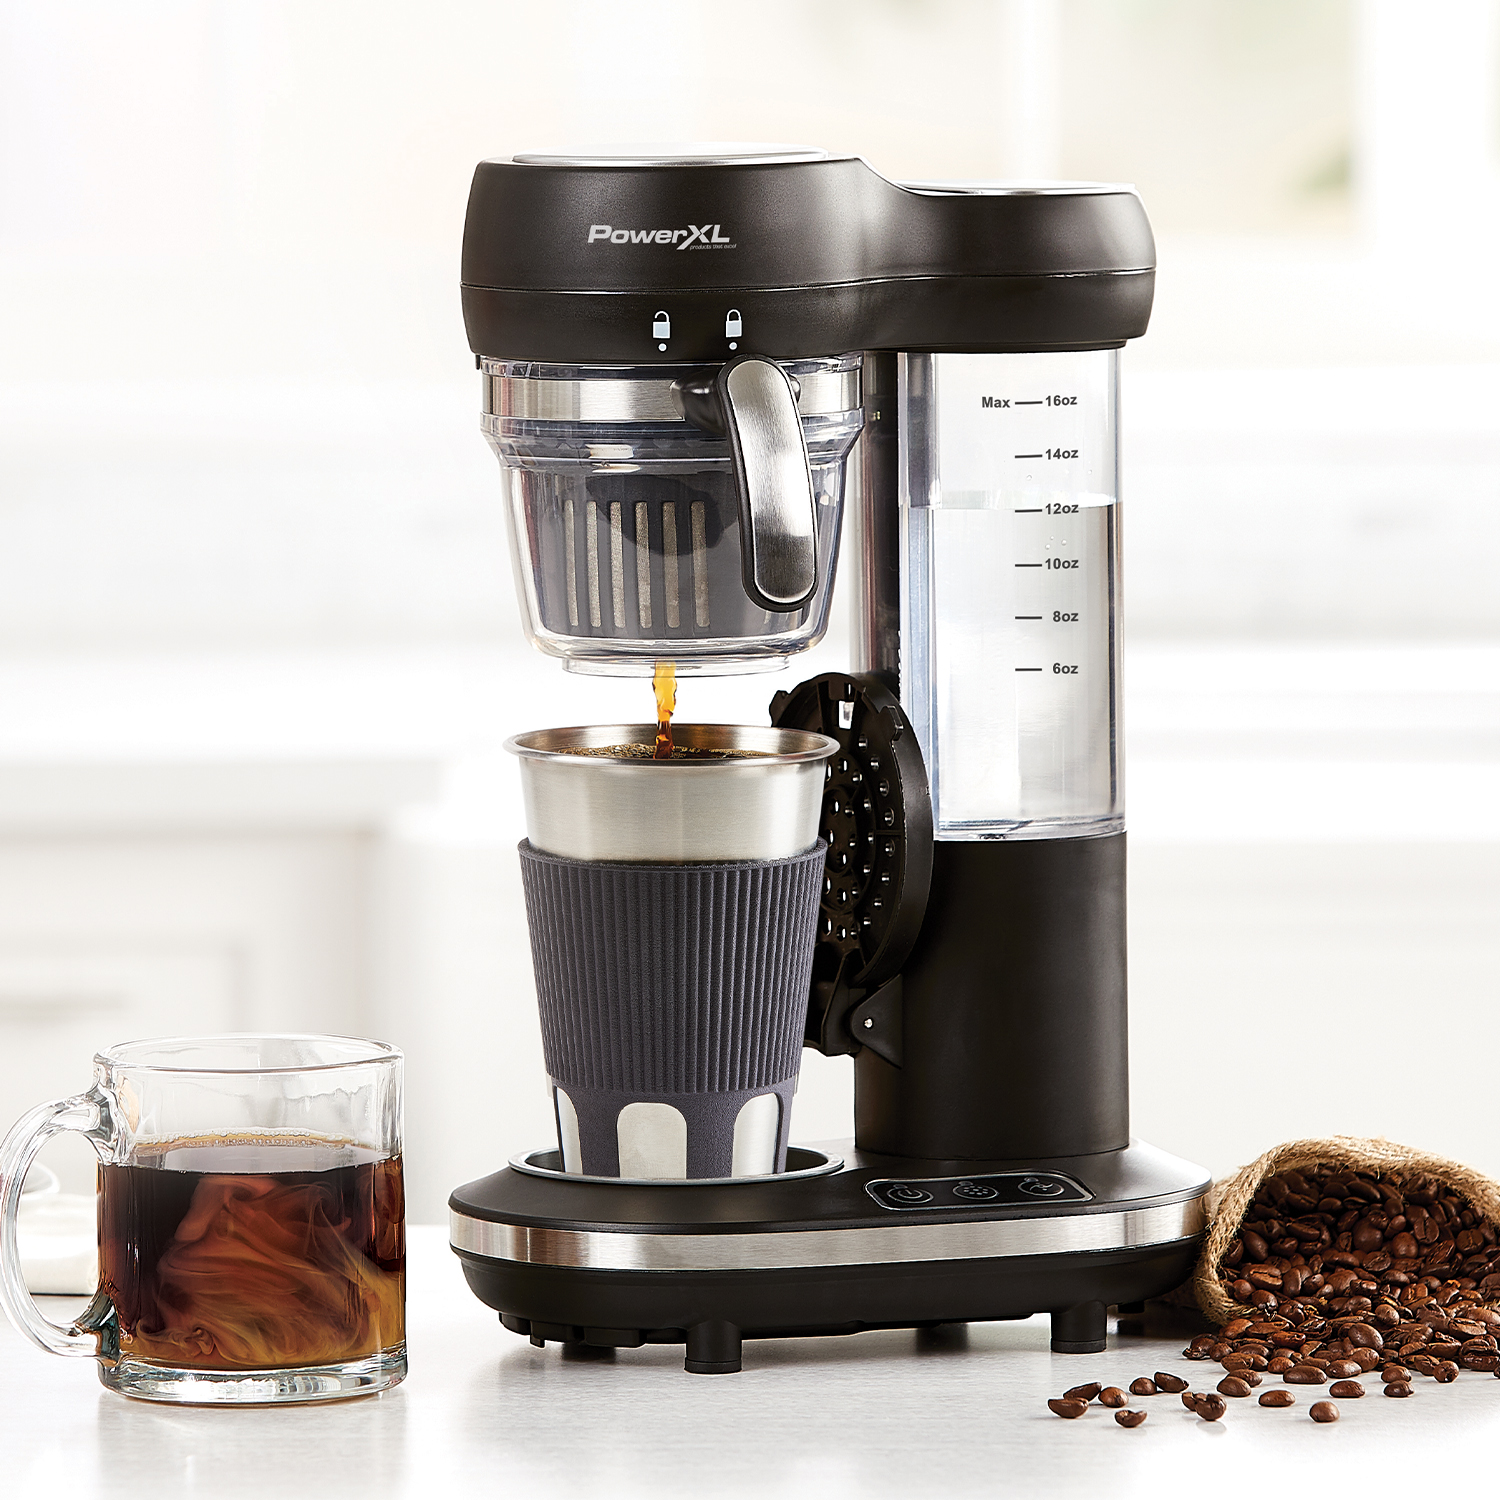 PowerXL Grind and Go Plus Coffee Maker, Automatic Single-Serve Coffee Machine with 16-Oz - image 2 of 6